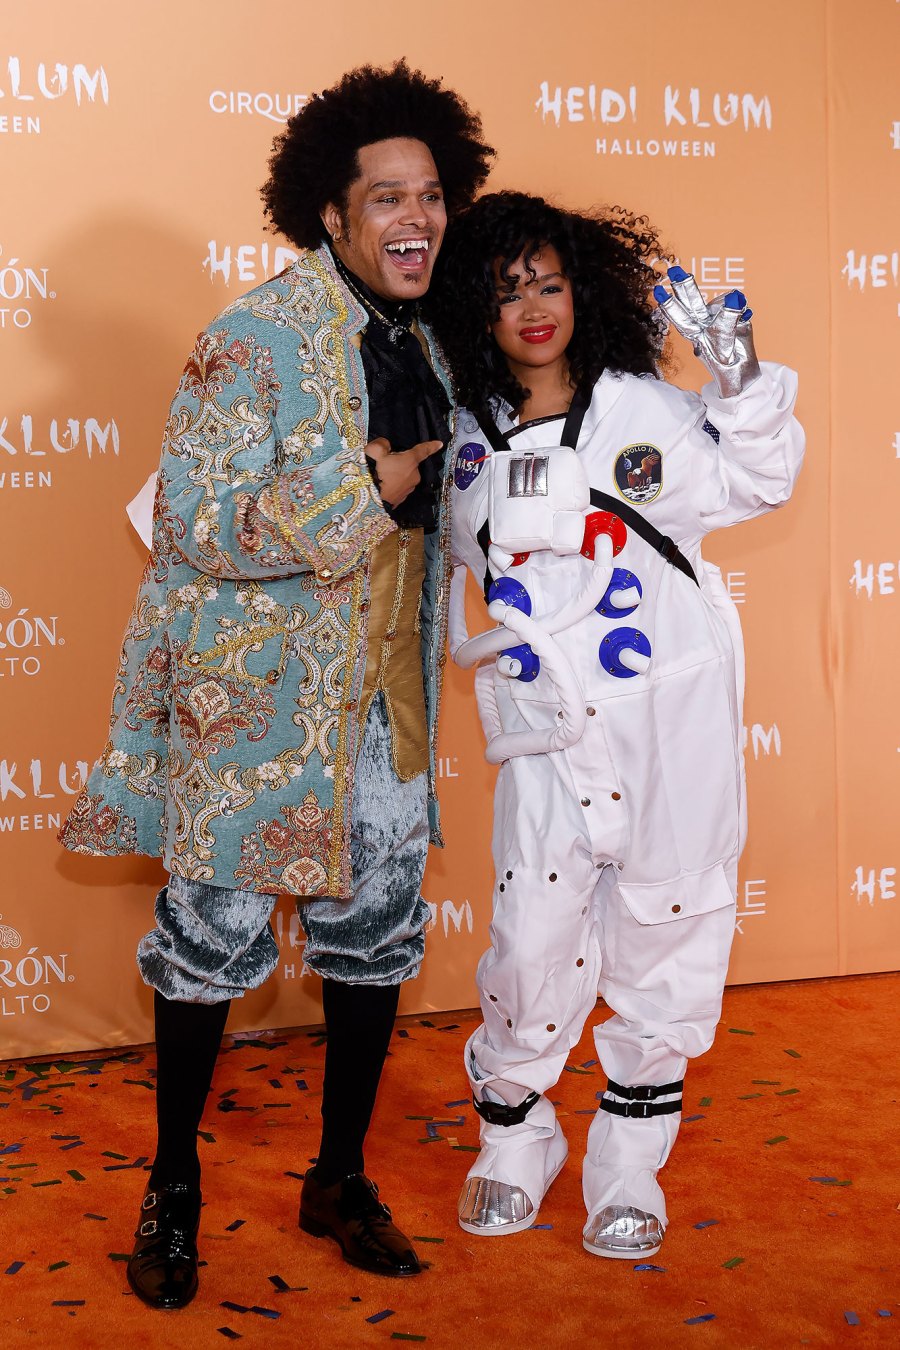 Maxwell and HER Inside Heidi Klum Star-Studded Halloween Party in NYC